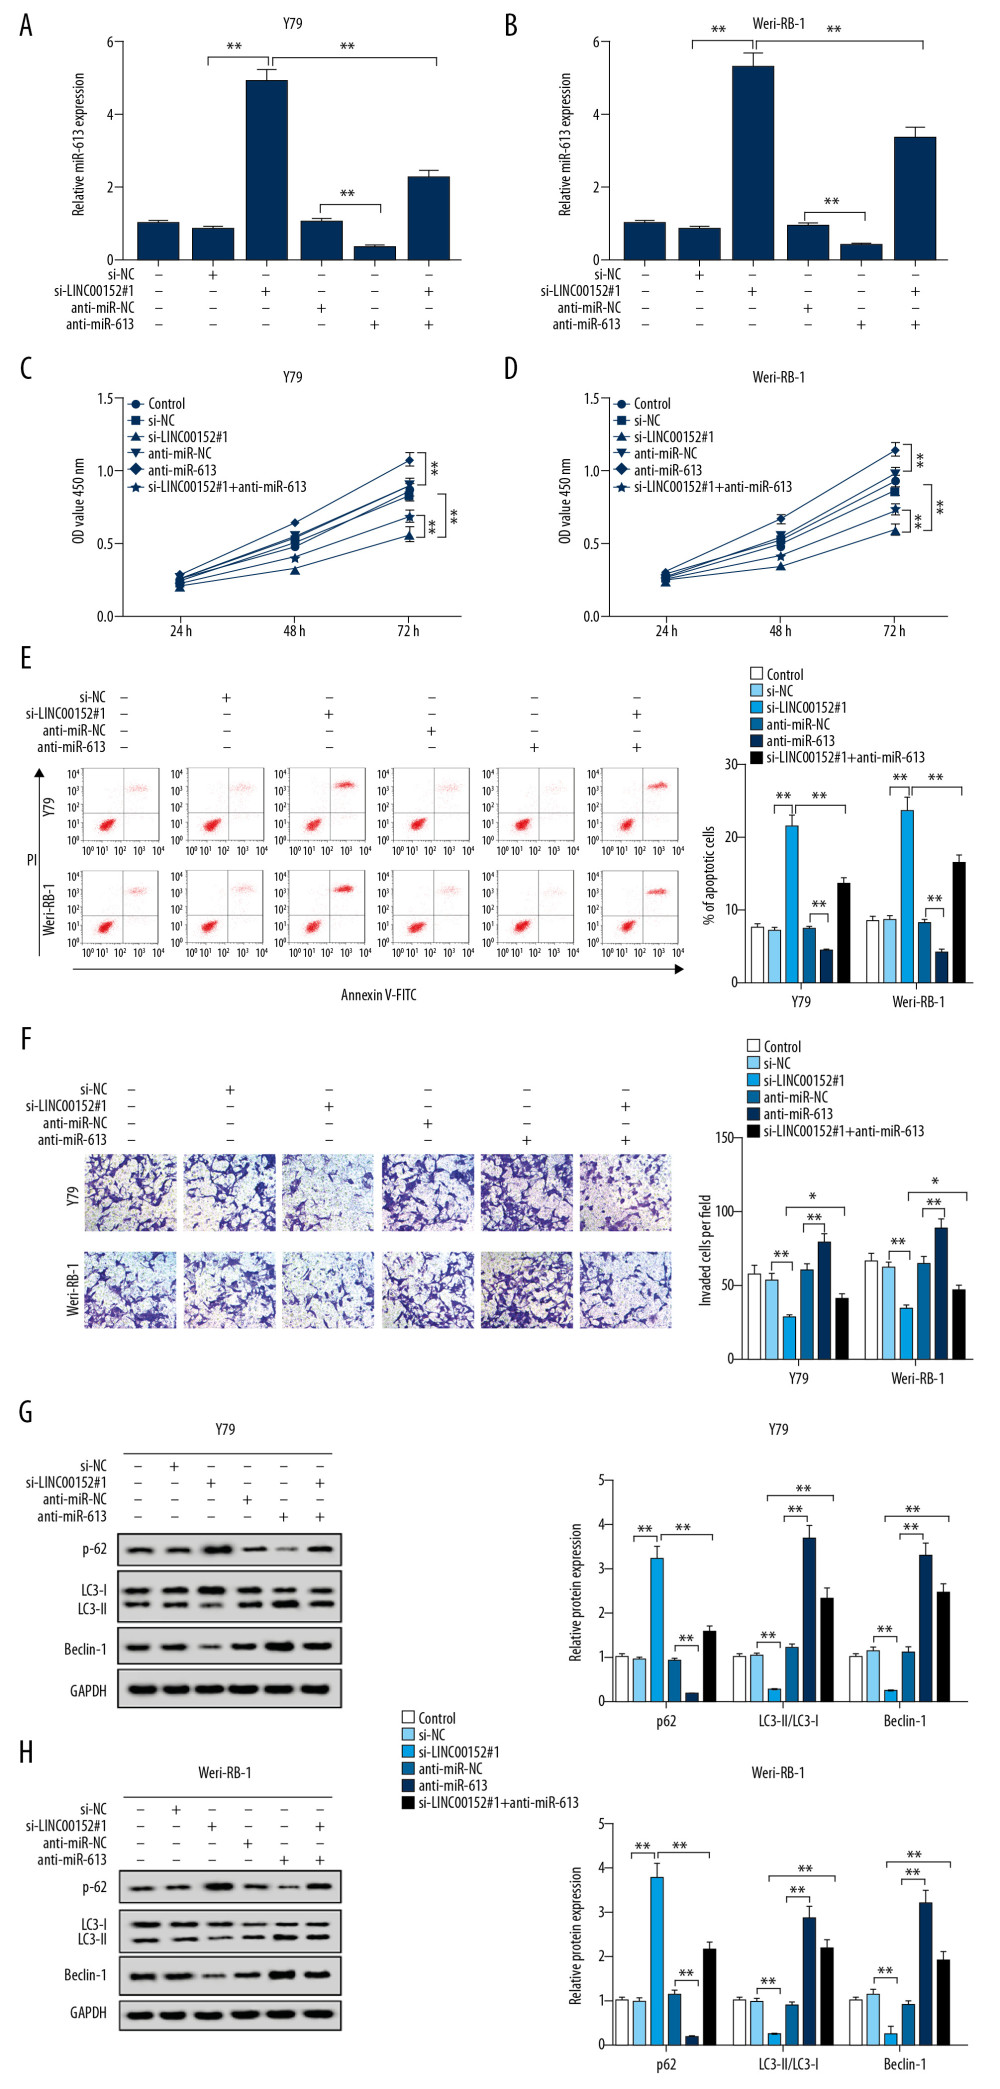 LINC00152 regulated proliferation, invasion, apoptosis and autophagy of retinoblastoma cells by targeting miR-613. (A–H) Y79 and Weri-RB-1 cells were transfected with si-NC, si-LINC00152#1, anti-miR-NC, anti-miR-613, or si-LINC00152#1+anti-miR-613, untransfected cells as internal control. (A, B) The expression level of miR-613 in transfected Y79 and Weri-RB-1 cells was assessed by RT-qPCR assay. (C, D) CCK-8 assay was performed to evaluate retinoblastoma cell viability at the indicated time points after transfection. (E, F) Cell apoptosis rate and invasion ability were detected in Y79 and Weri-RB-1 cells by flow cytometry and Transwell assays, respectively. (G, H) The protein expression levels of p62, LC3-I, LC3-II and Beclin-1 were examined in Y79 and Weri-RB-1 cells with western blot assay. * P<0.05; ** P<0.01. RT-qPCR – real-time quantitative polymerase chain reaction; CCK-8 – Cell Counting Kit-8.